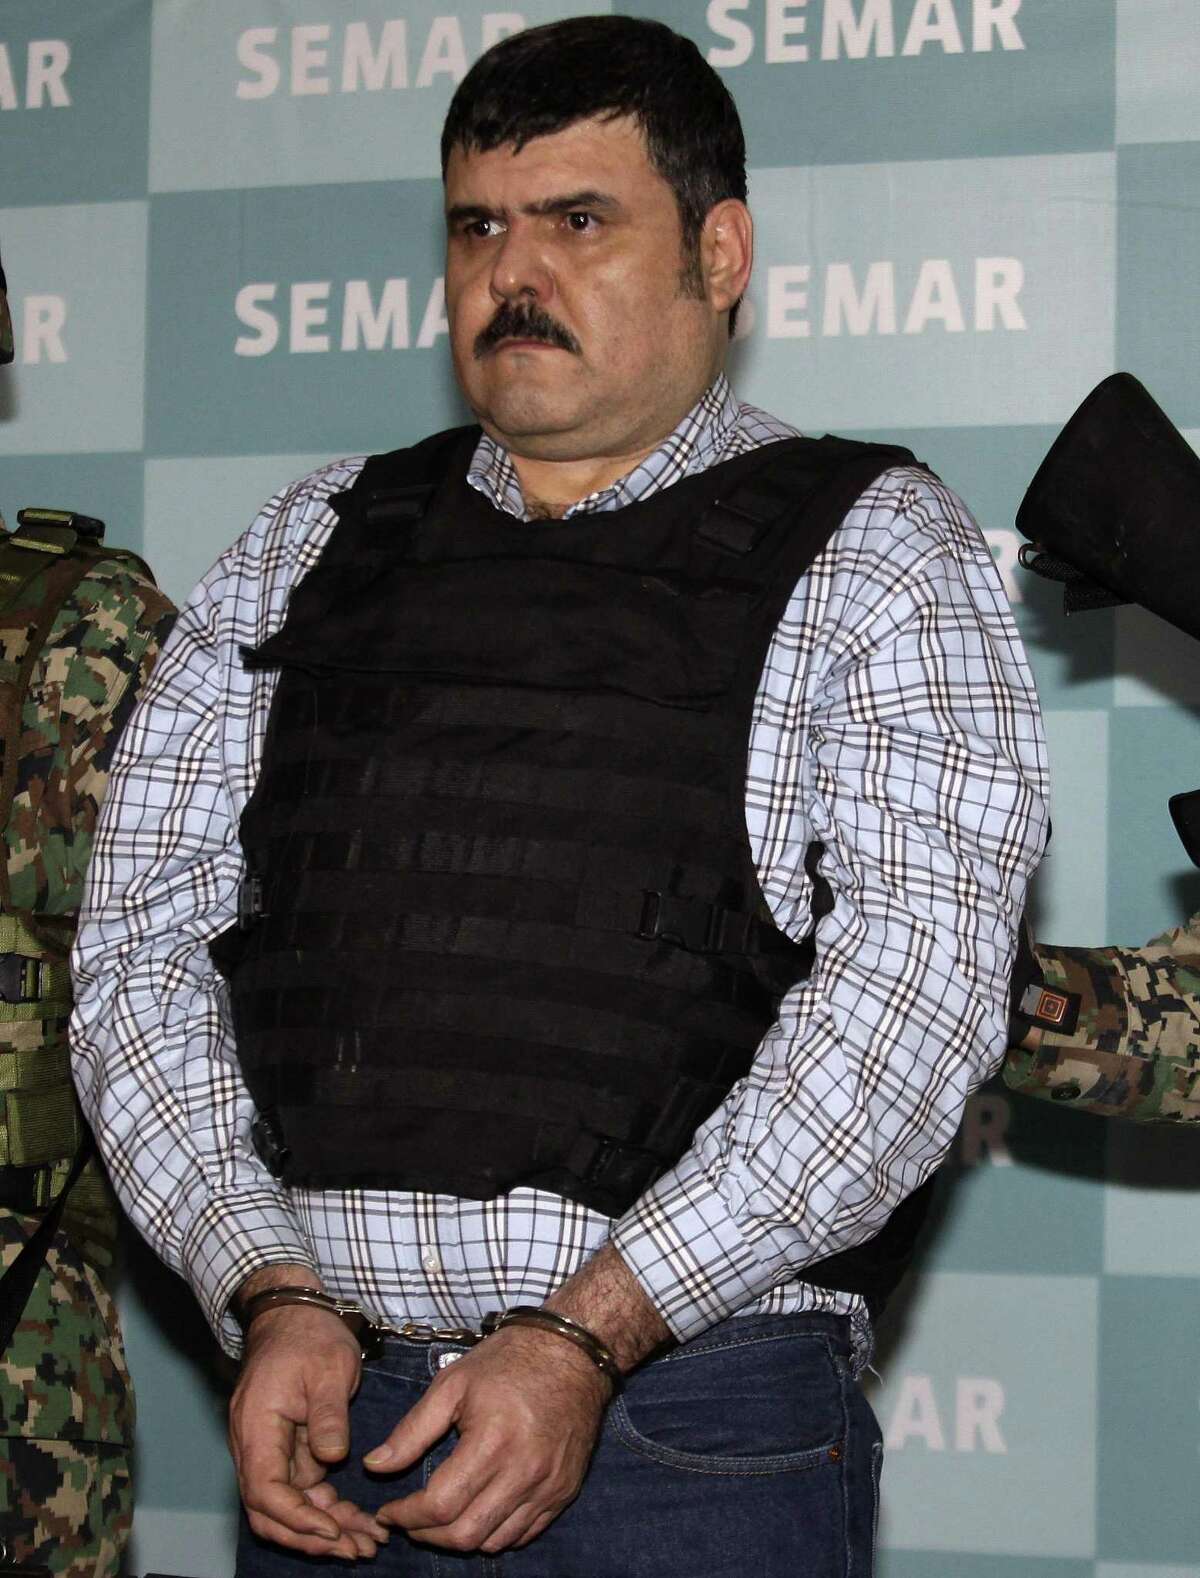 Jorge Eduardo Costilla Sanchez, aka "El Coss," is presented to the media in Mexico City in September 2012 after his capture. Costilla has pleaded guilty to conspiracy drug charges and assault, federal authorities said Tuesday.